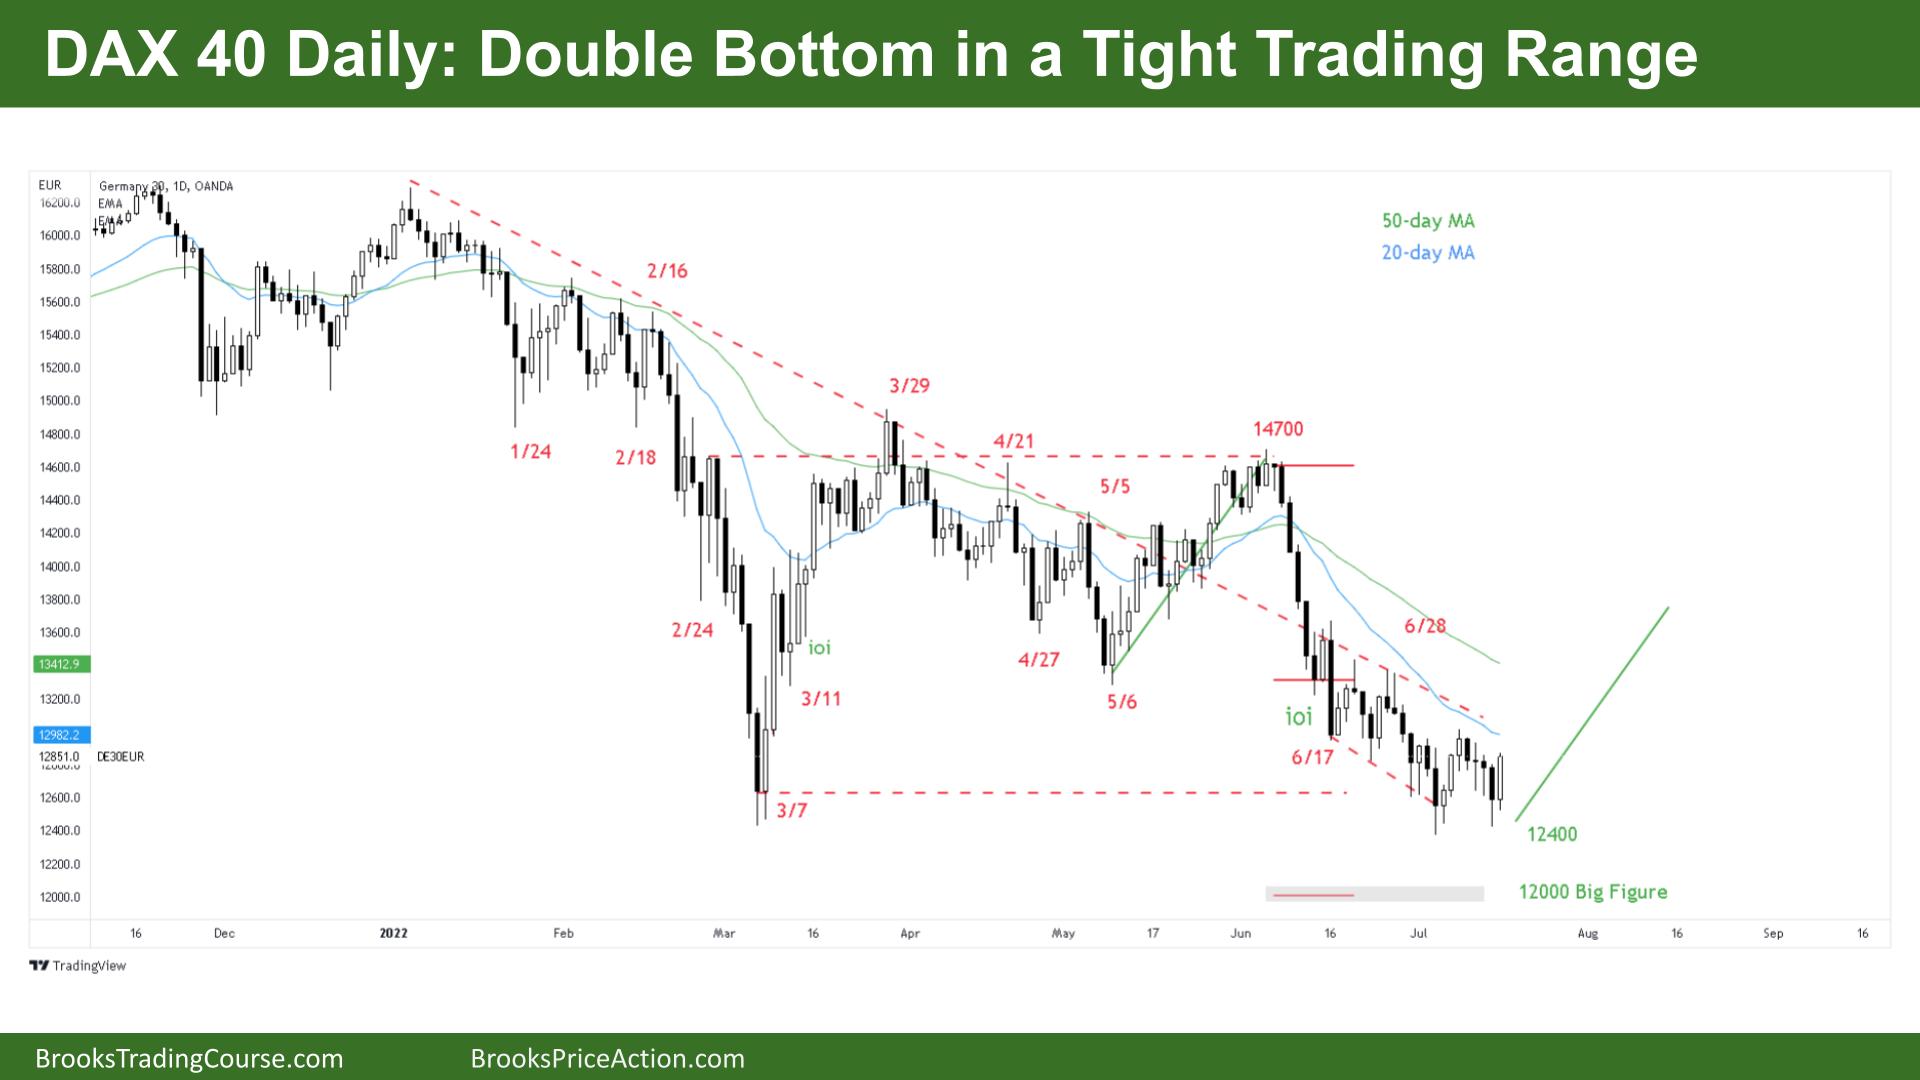 DAX 40 Daily Double Bottom in a Tight Trading Range
